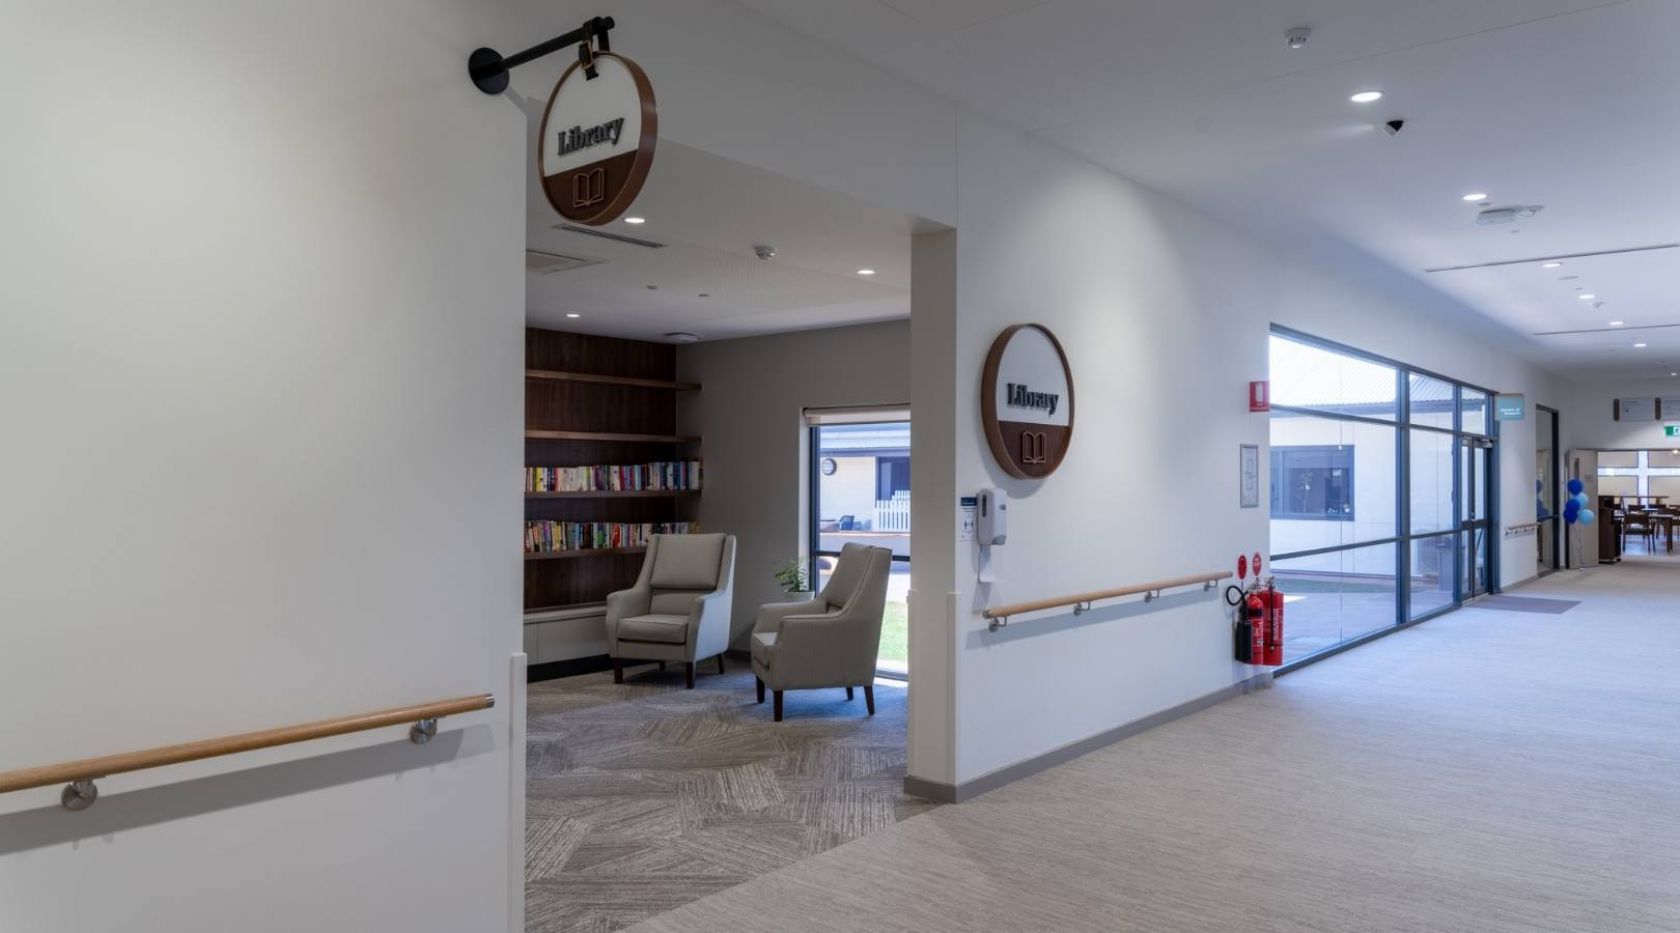 Cavalry Aged Care Facility library